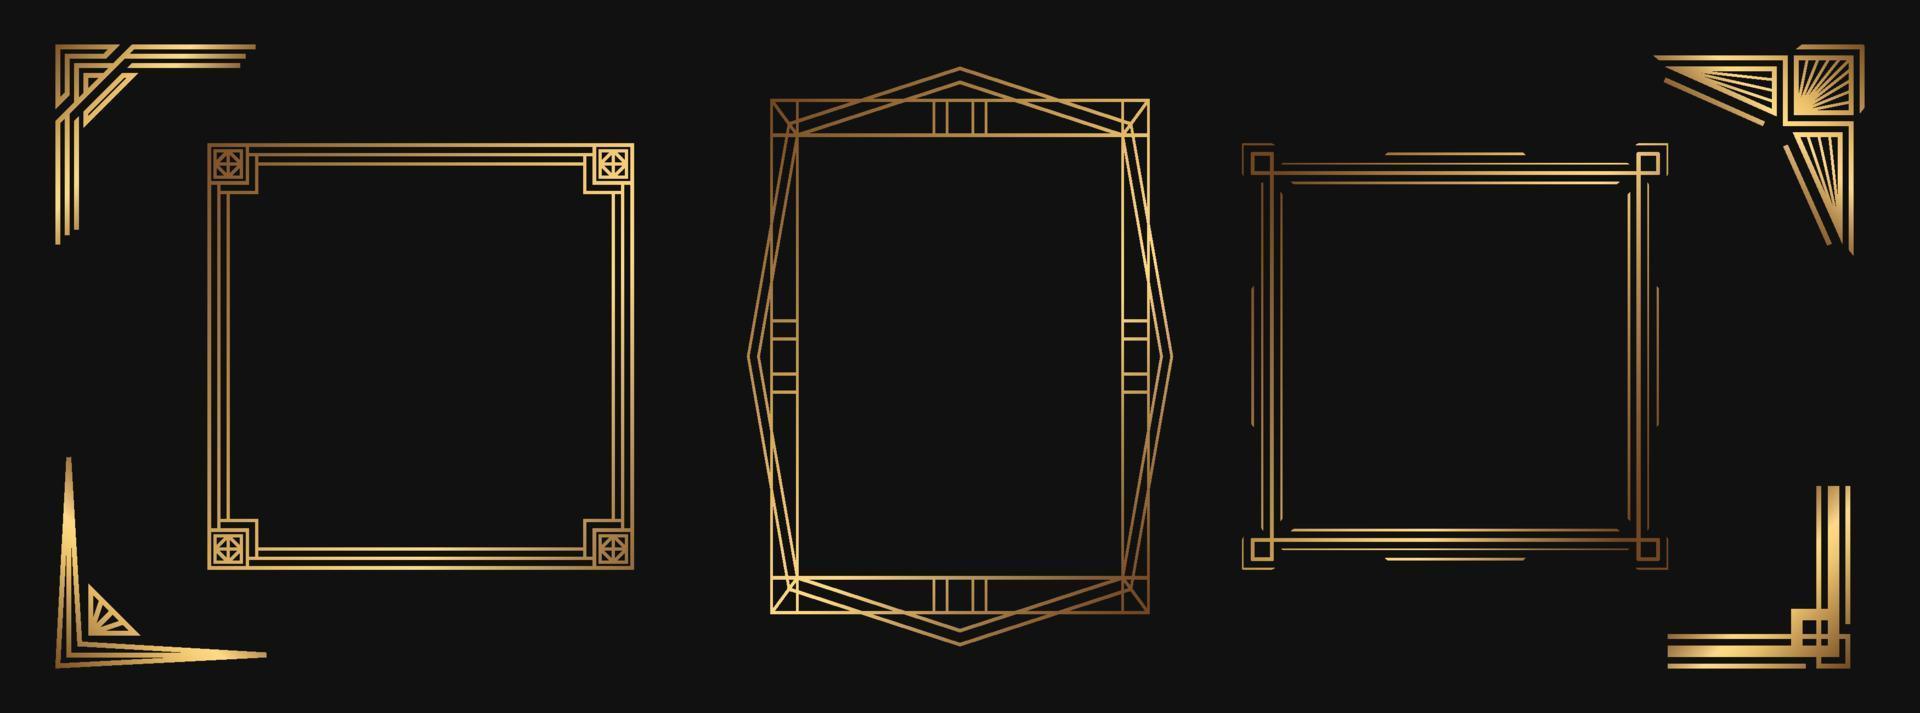 Set of golden decorative elements. Isolated art deco frames and borders for design vector